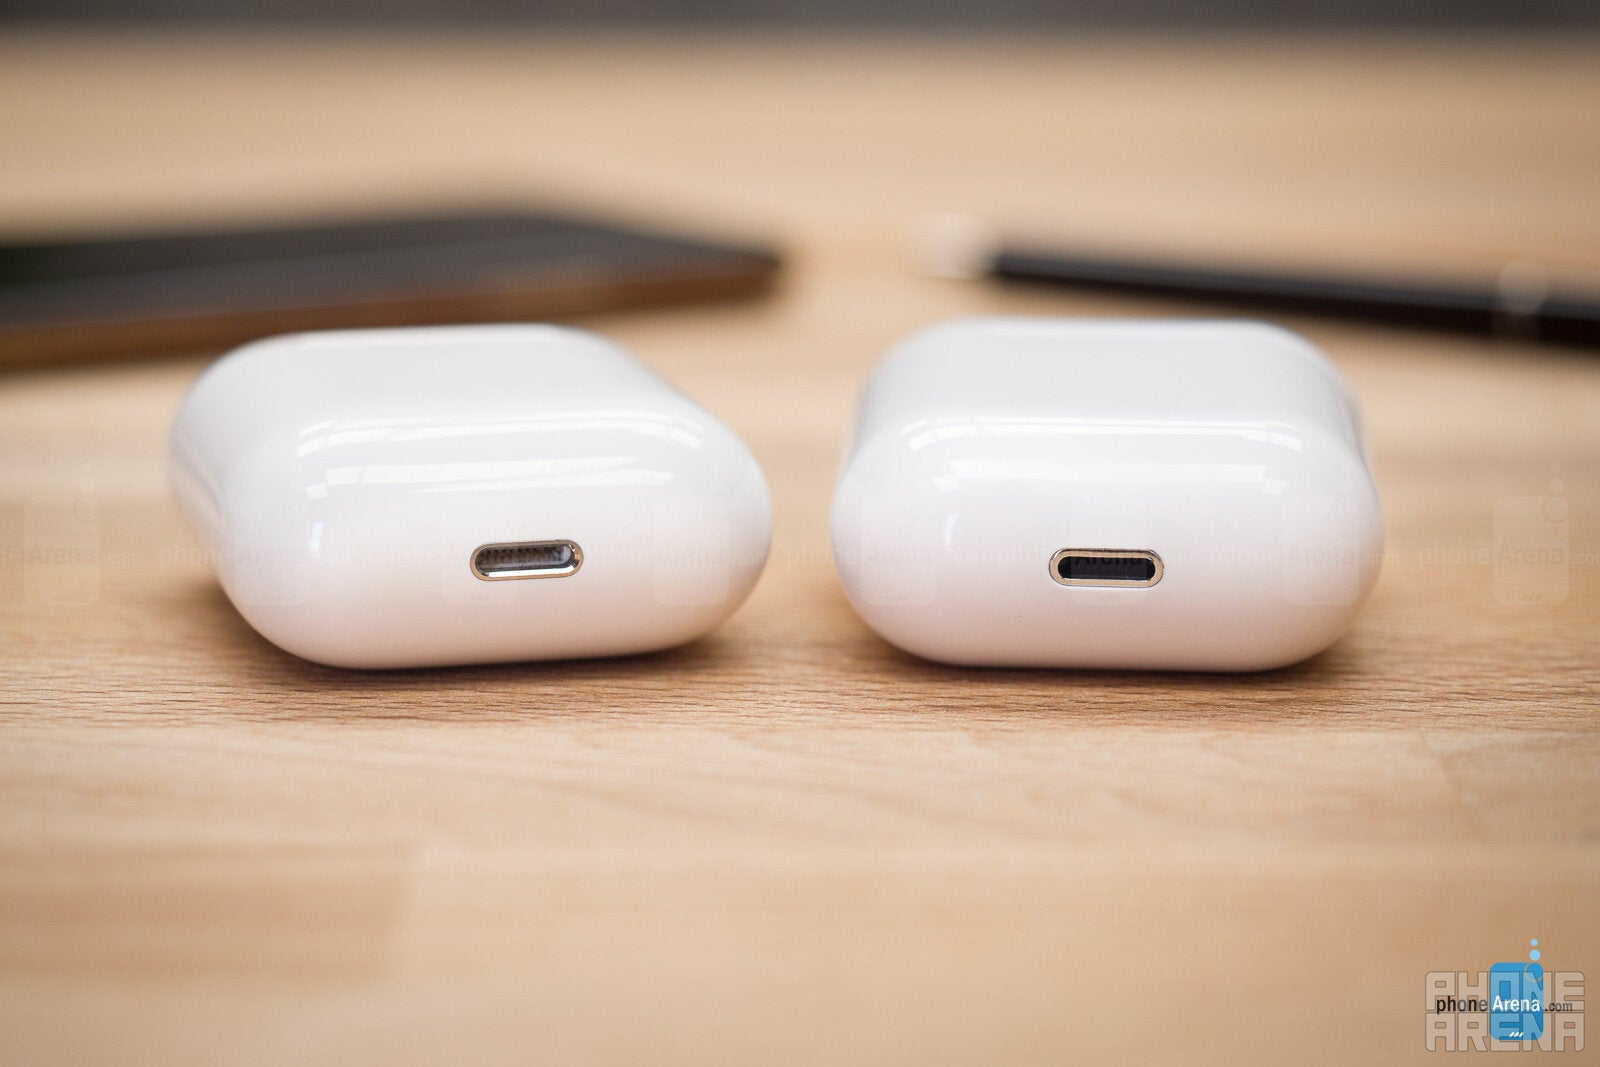 Real AirPods on the left, i14 on the right - We tried a pair of fake AirPods so you don&#039;t have to